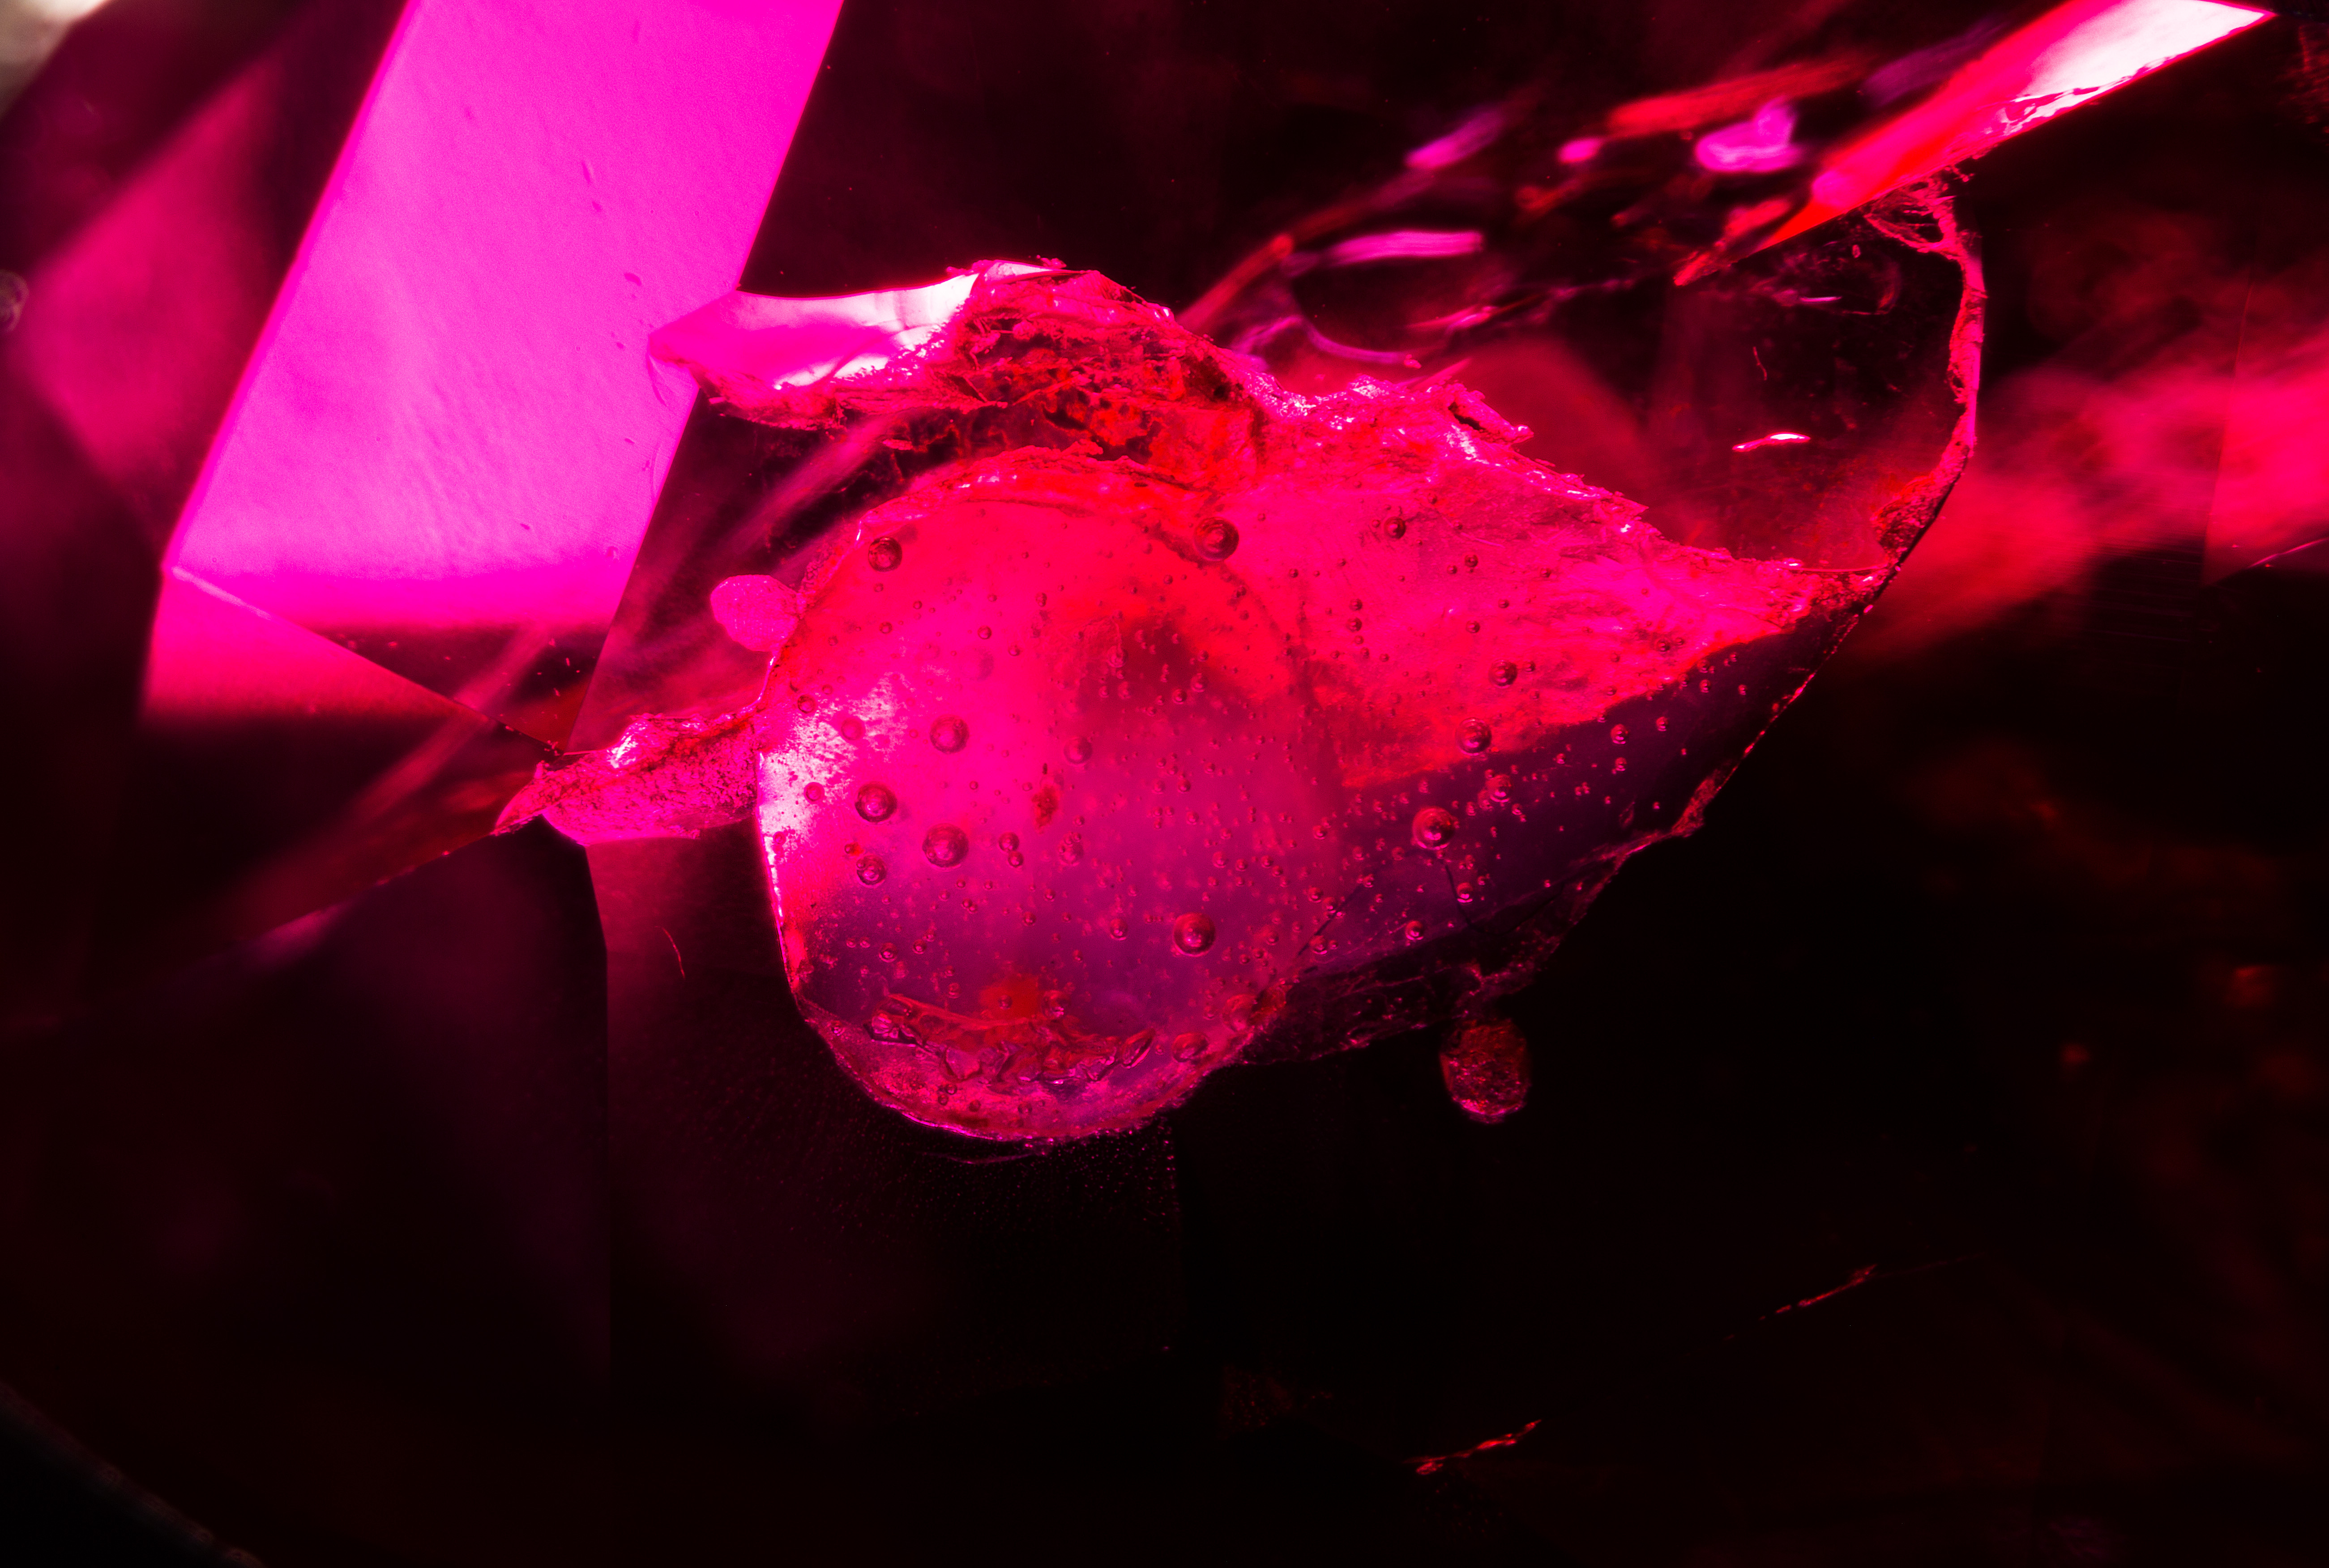 This ruby contains a surface reaching cavity that appears to contain hardened resin, depicted here with dark field illumination.